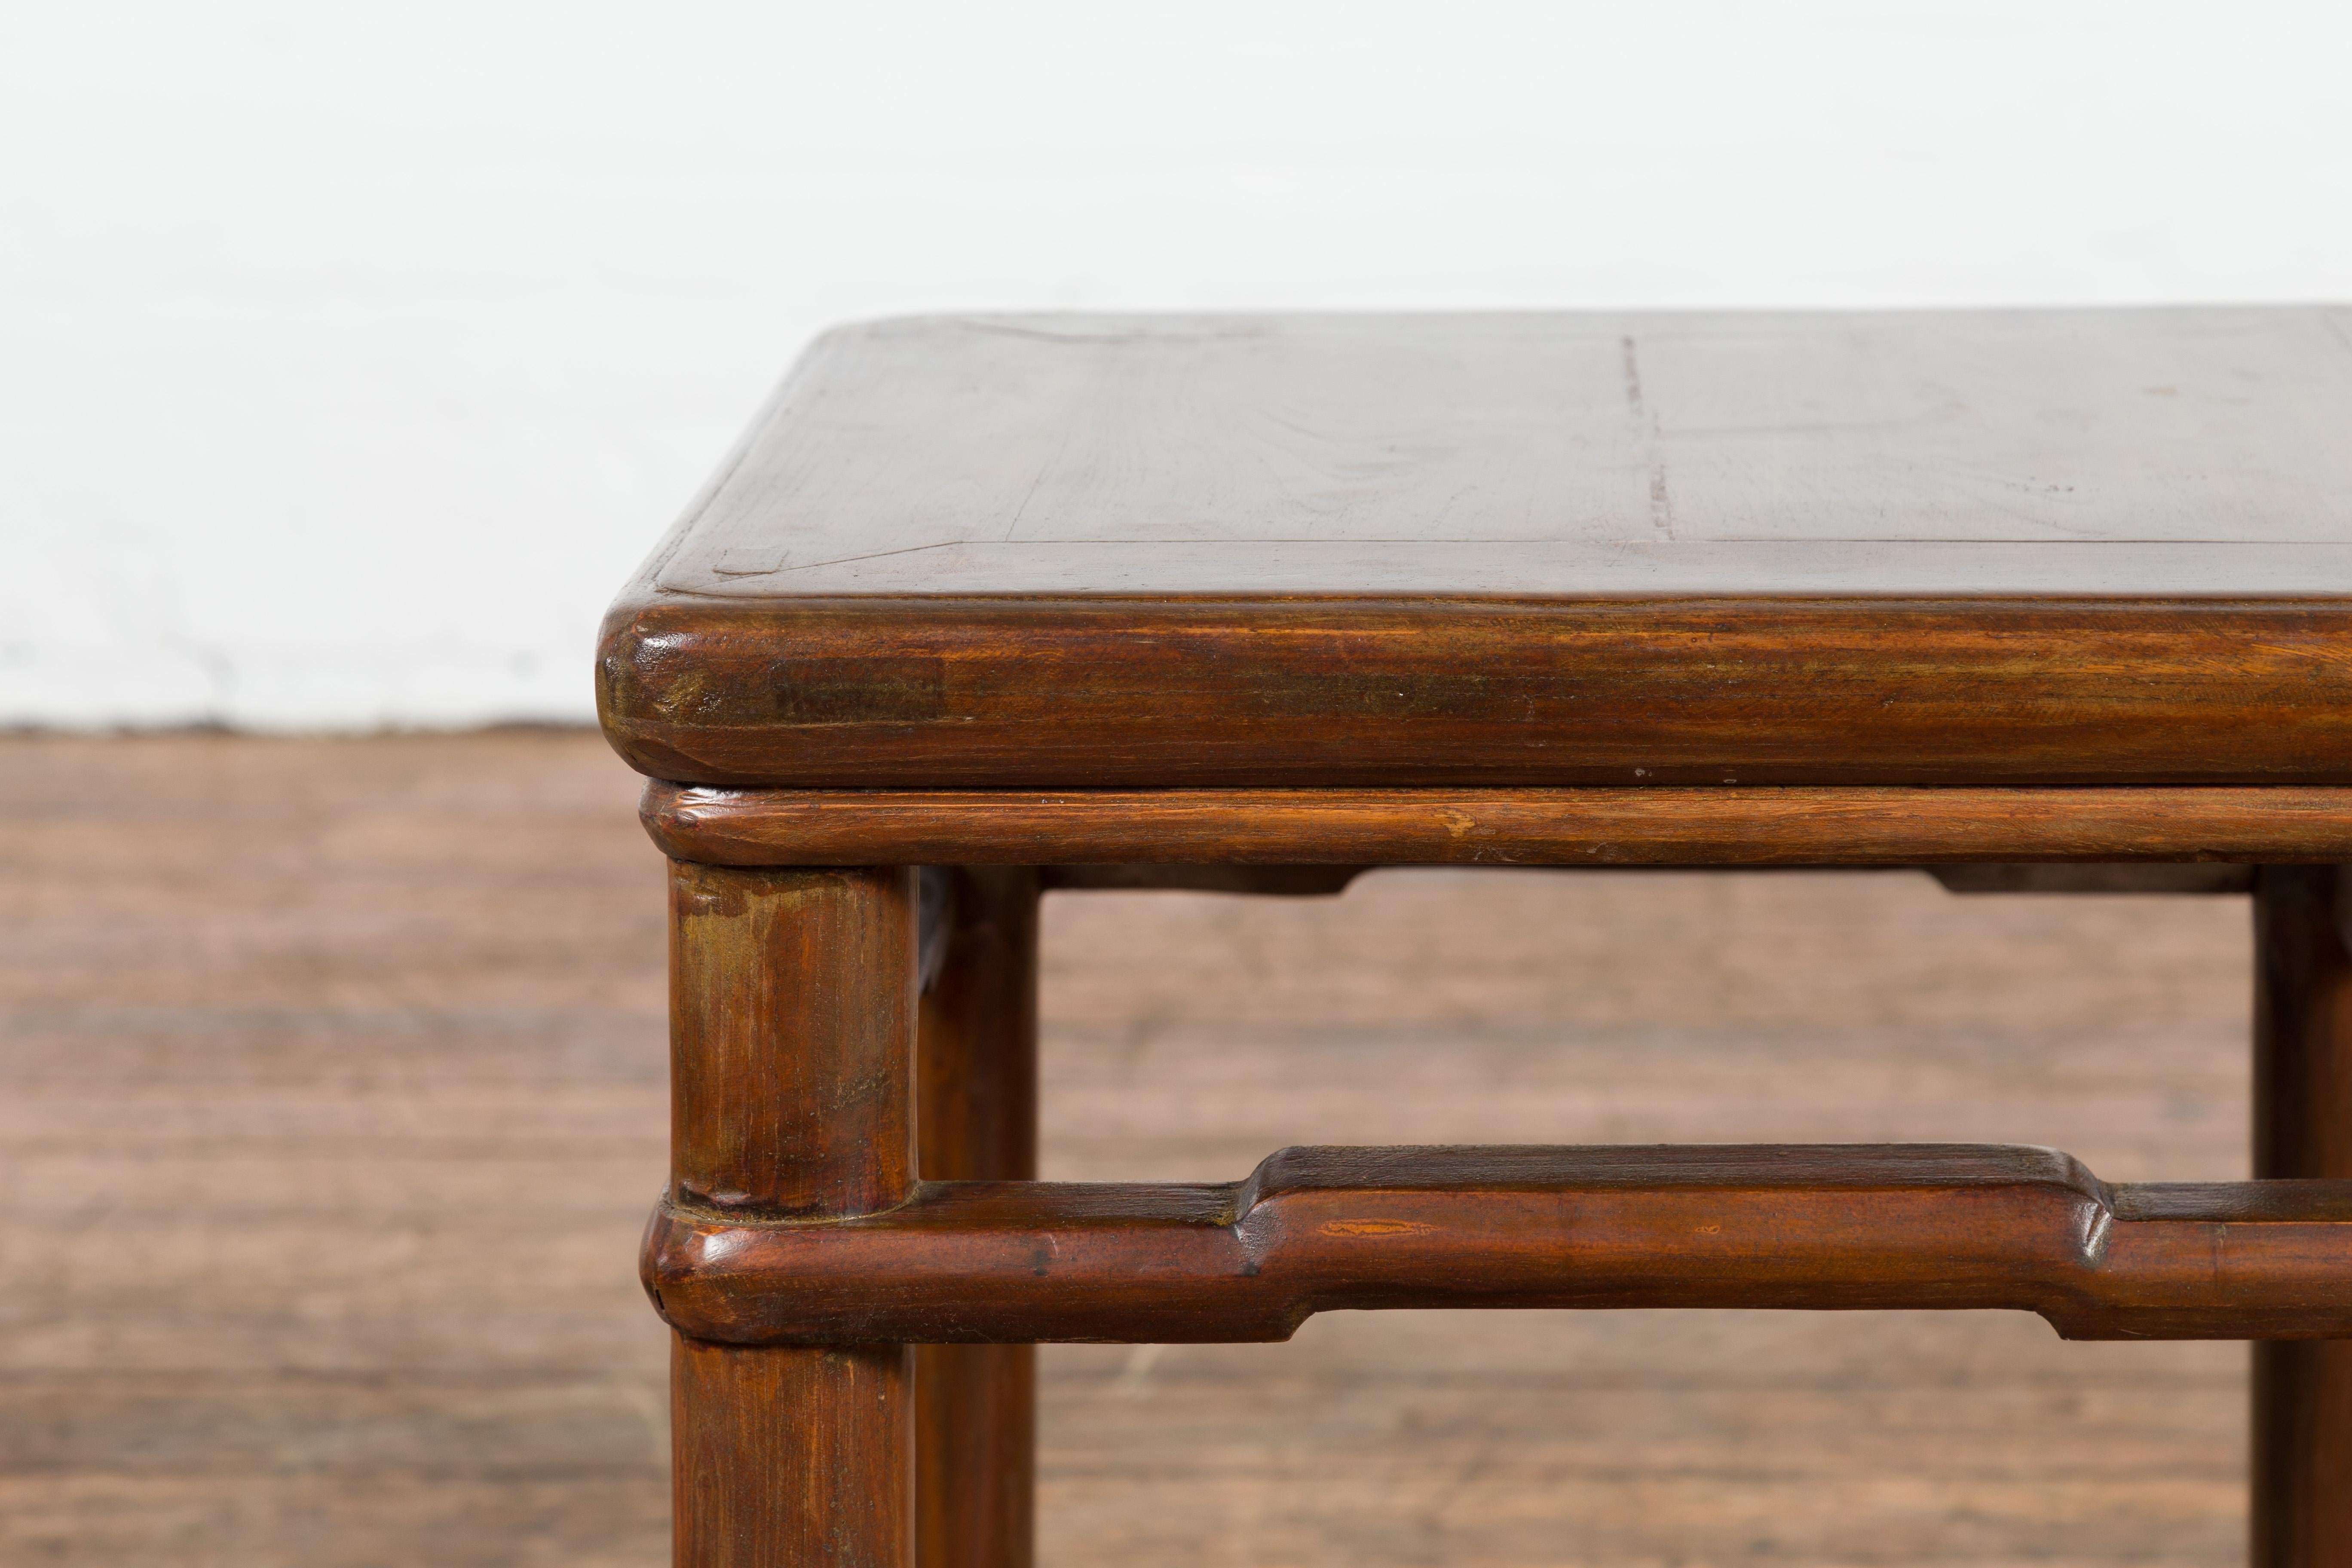 Chinese Qing Dynasty Period 19th Century Side Table with Humpback Stretchers For Sale 1